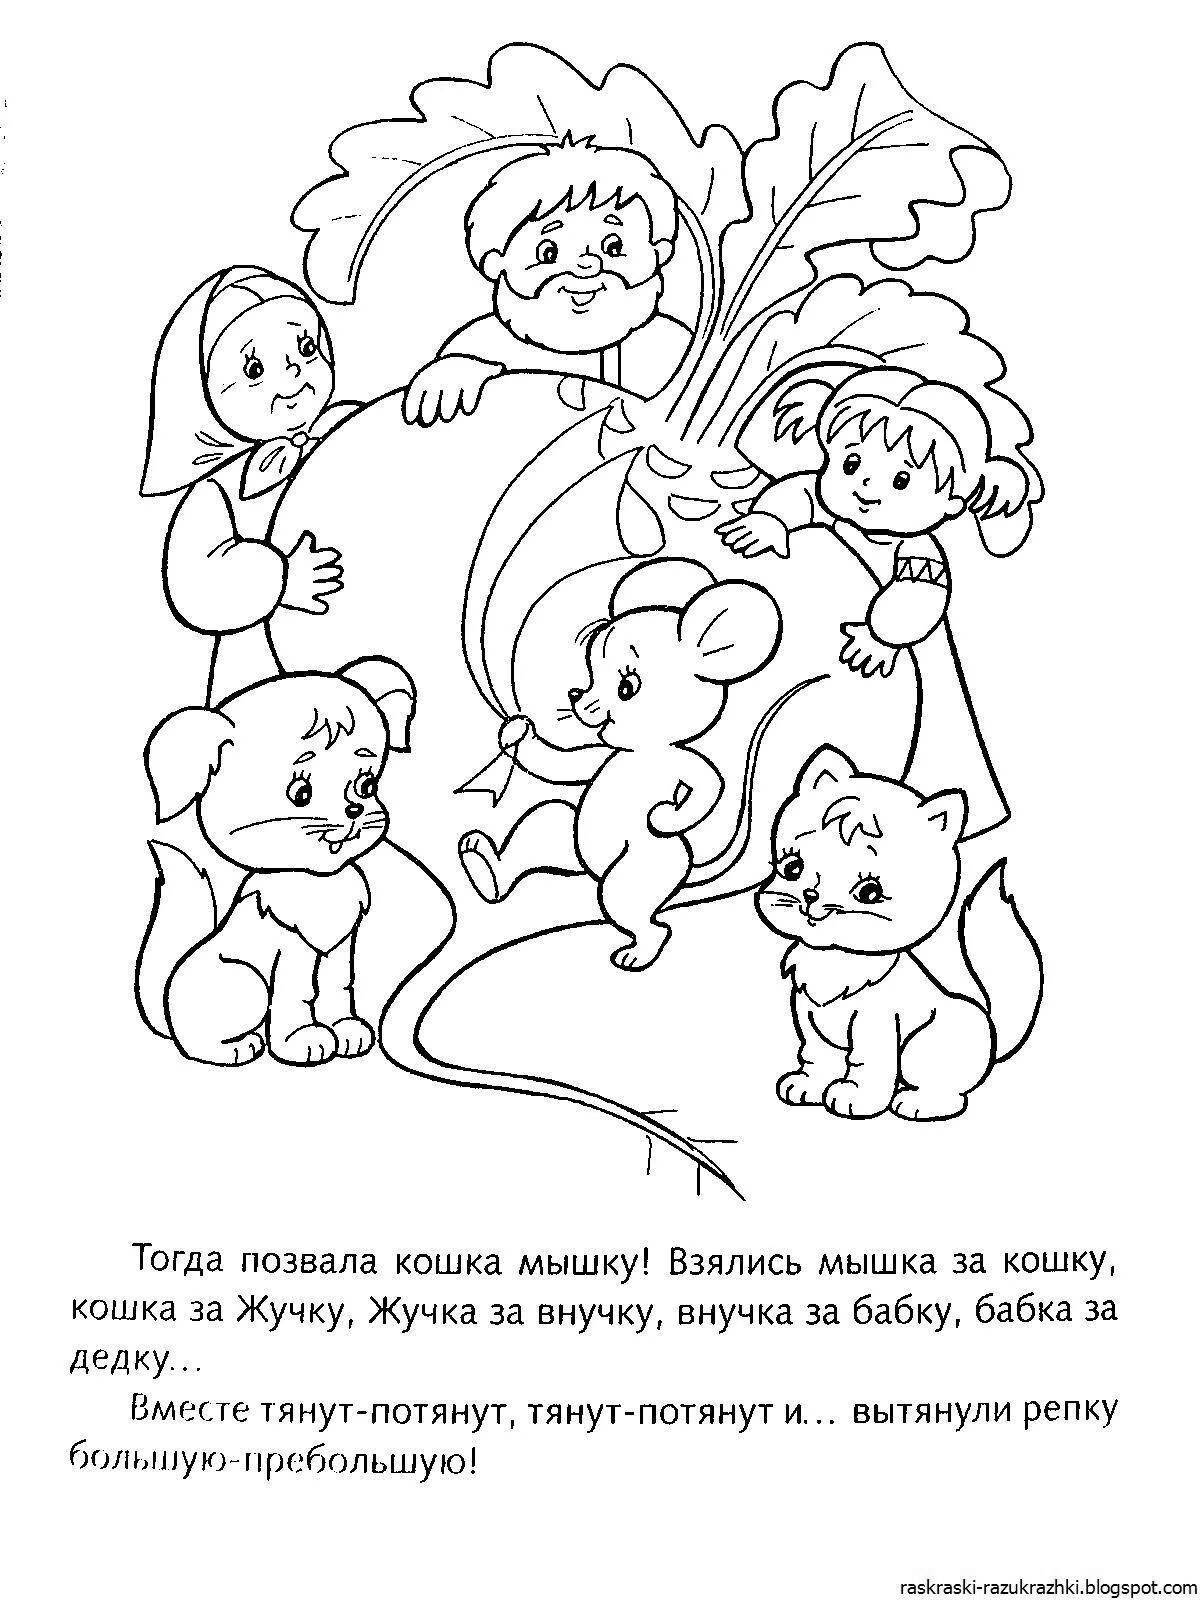 Great turnip coloring page for little learners